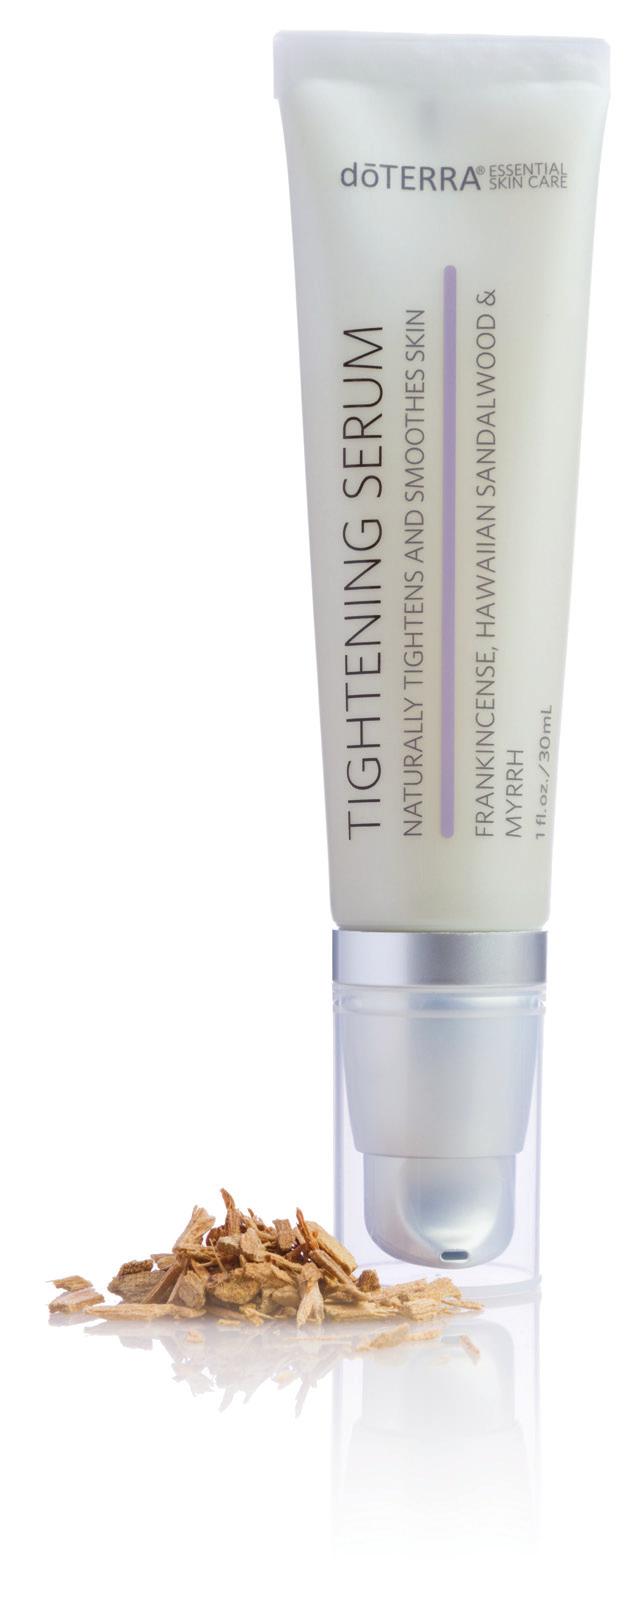 Natural extracts and gums combine with powerful anti-aging ingredients for firmer, younger-looking skin.